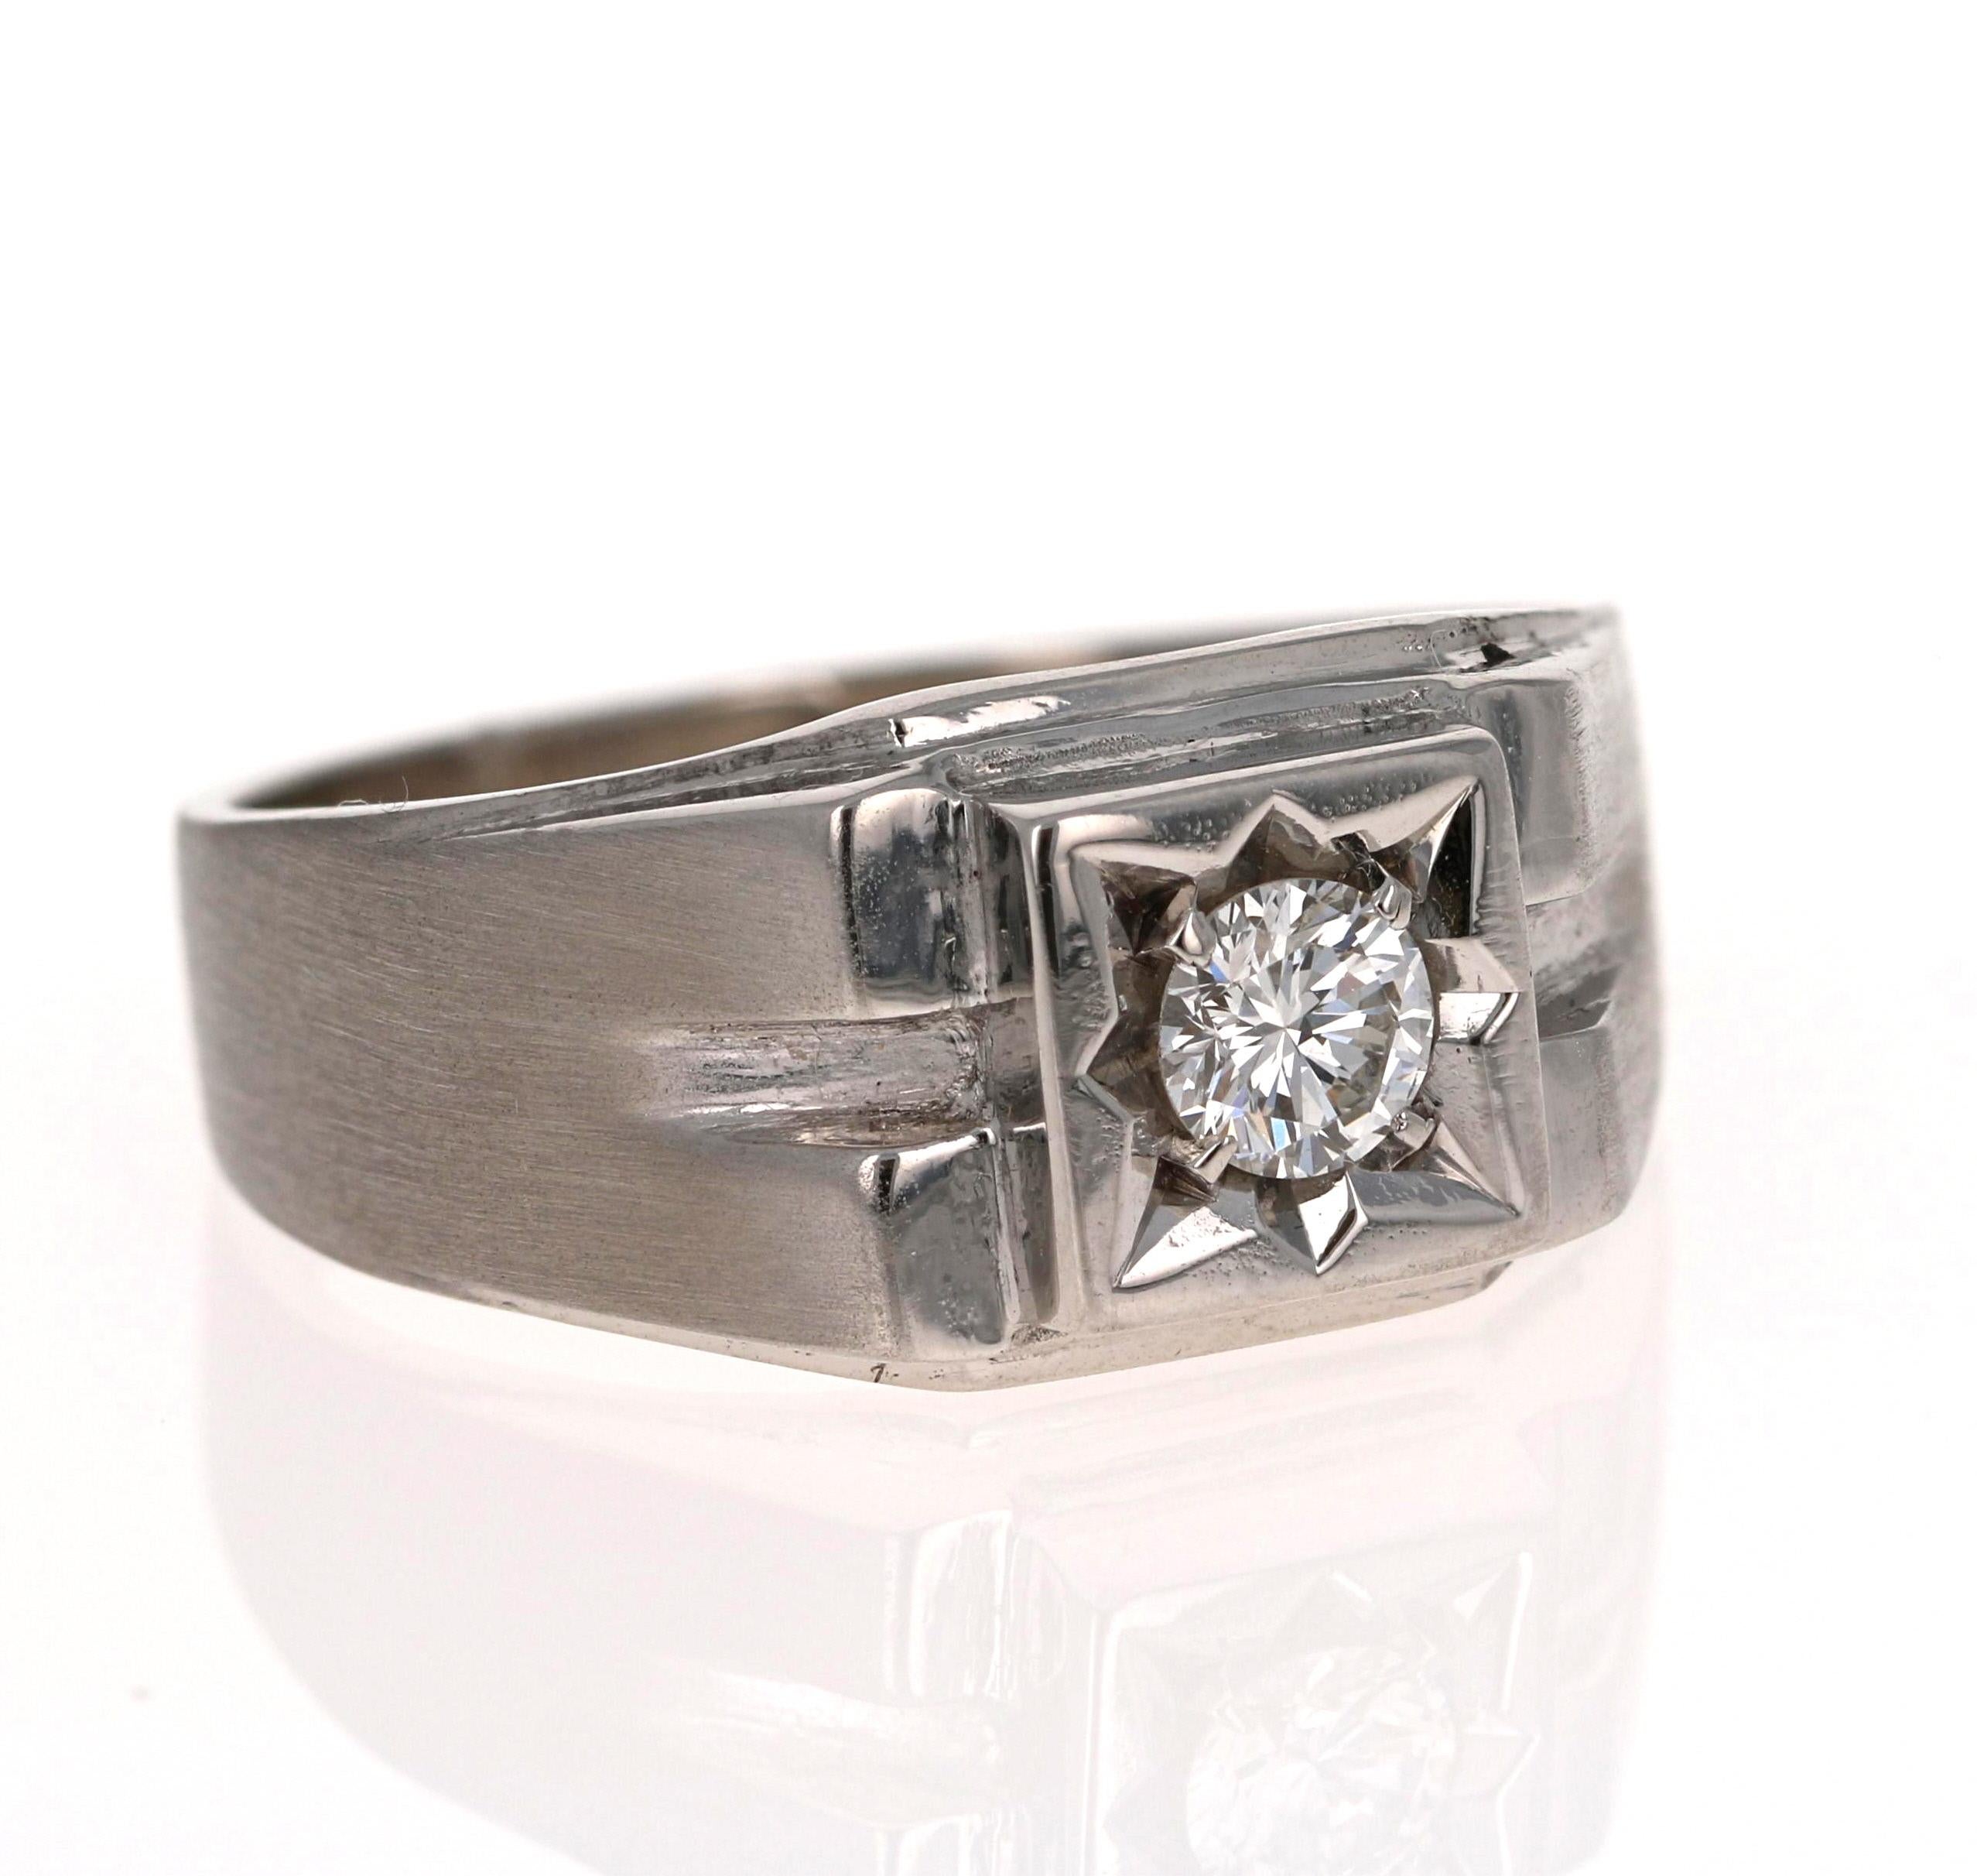  Looking for a Father's Day Gift or an Engagement Band?!  Check out our Men's Collection!

This classic Mens' Ring is set with 1 Princess Cut Diamond that weigh 0.30 Carats (Clarity: VS, Color: I). 
The Total Carat Weight of this ring is 0.30